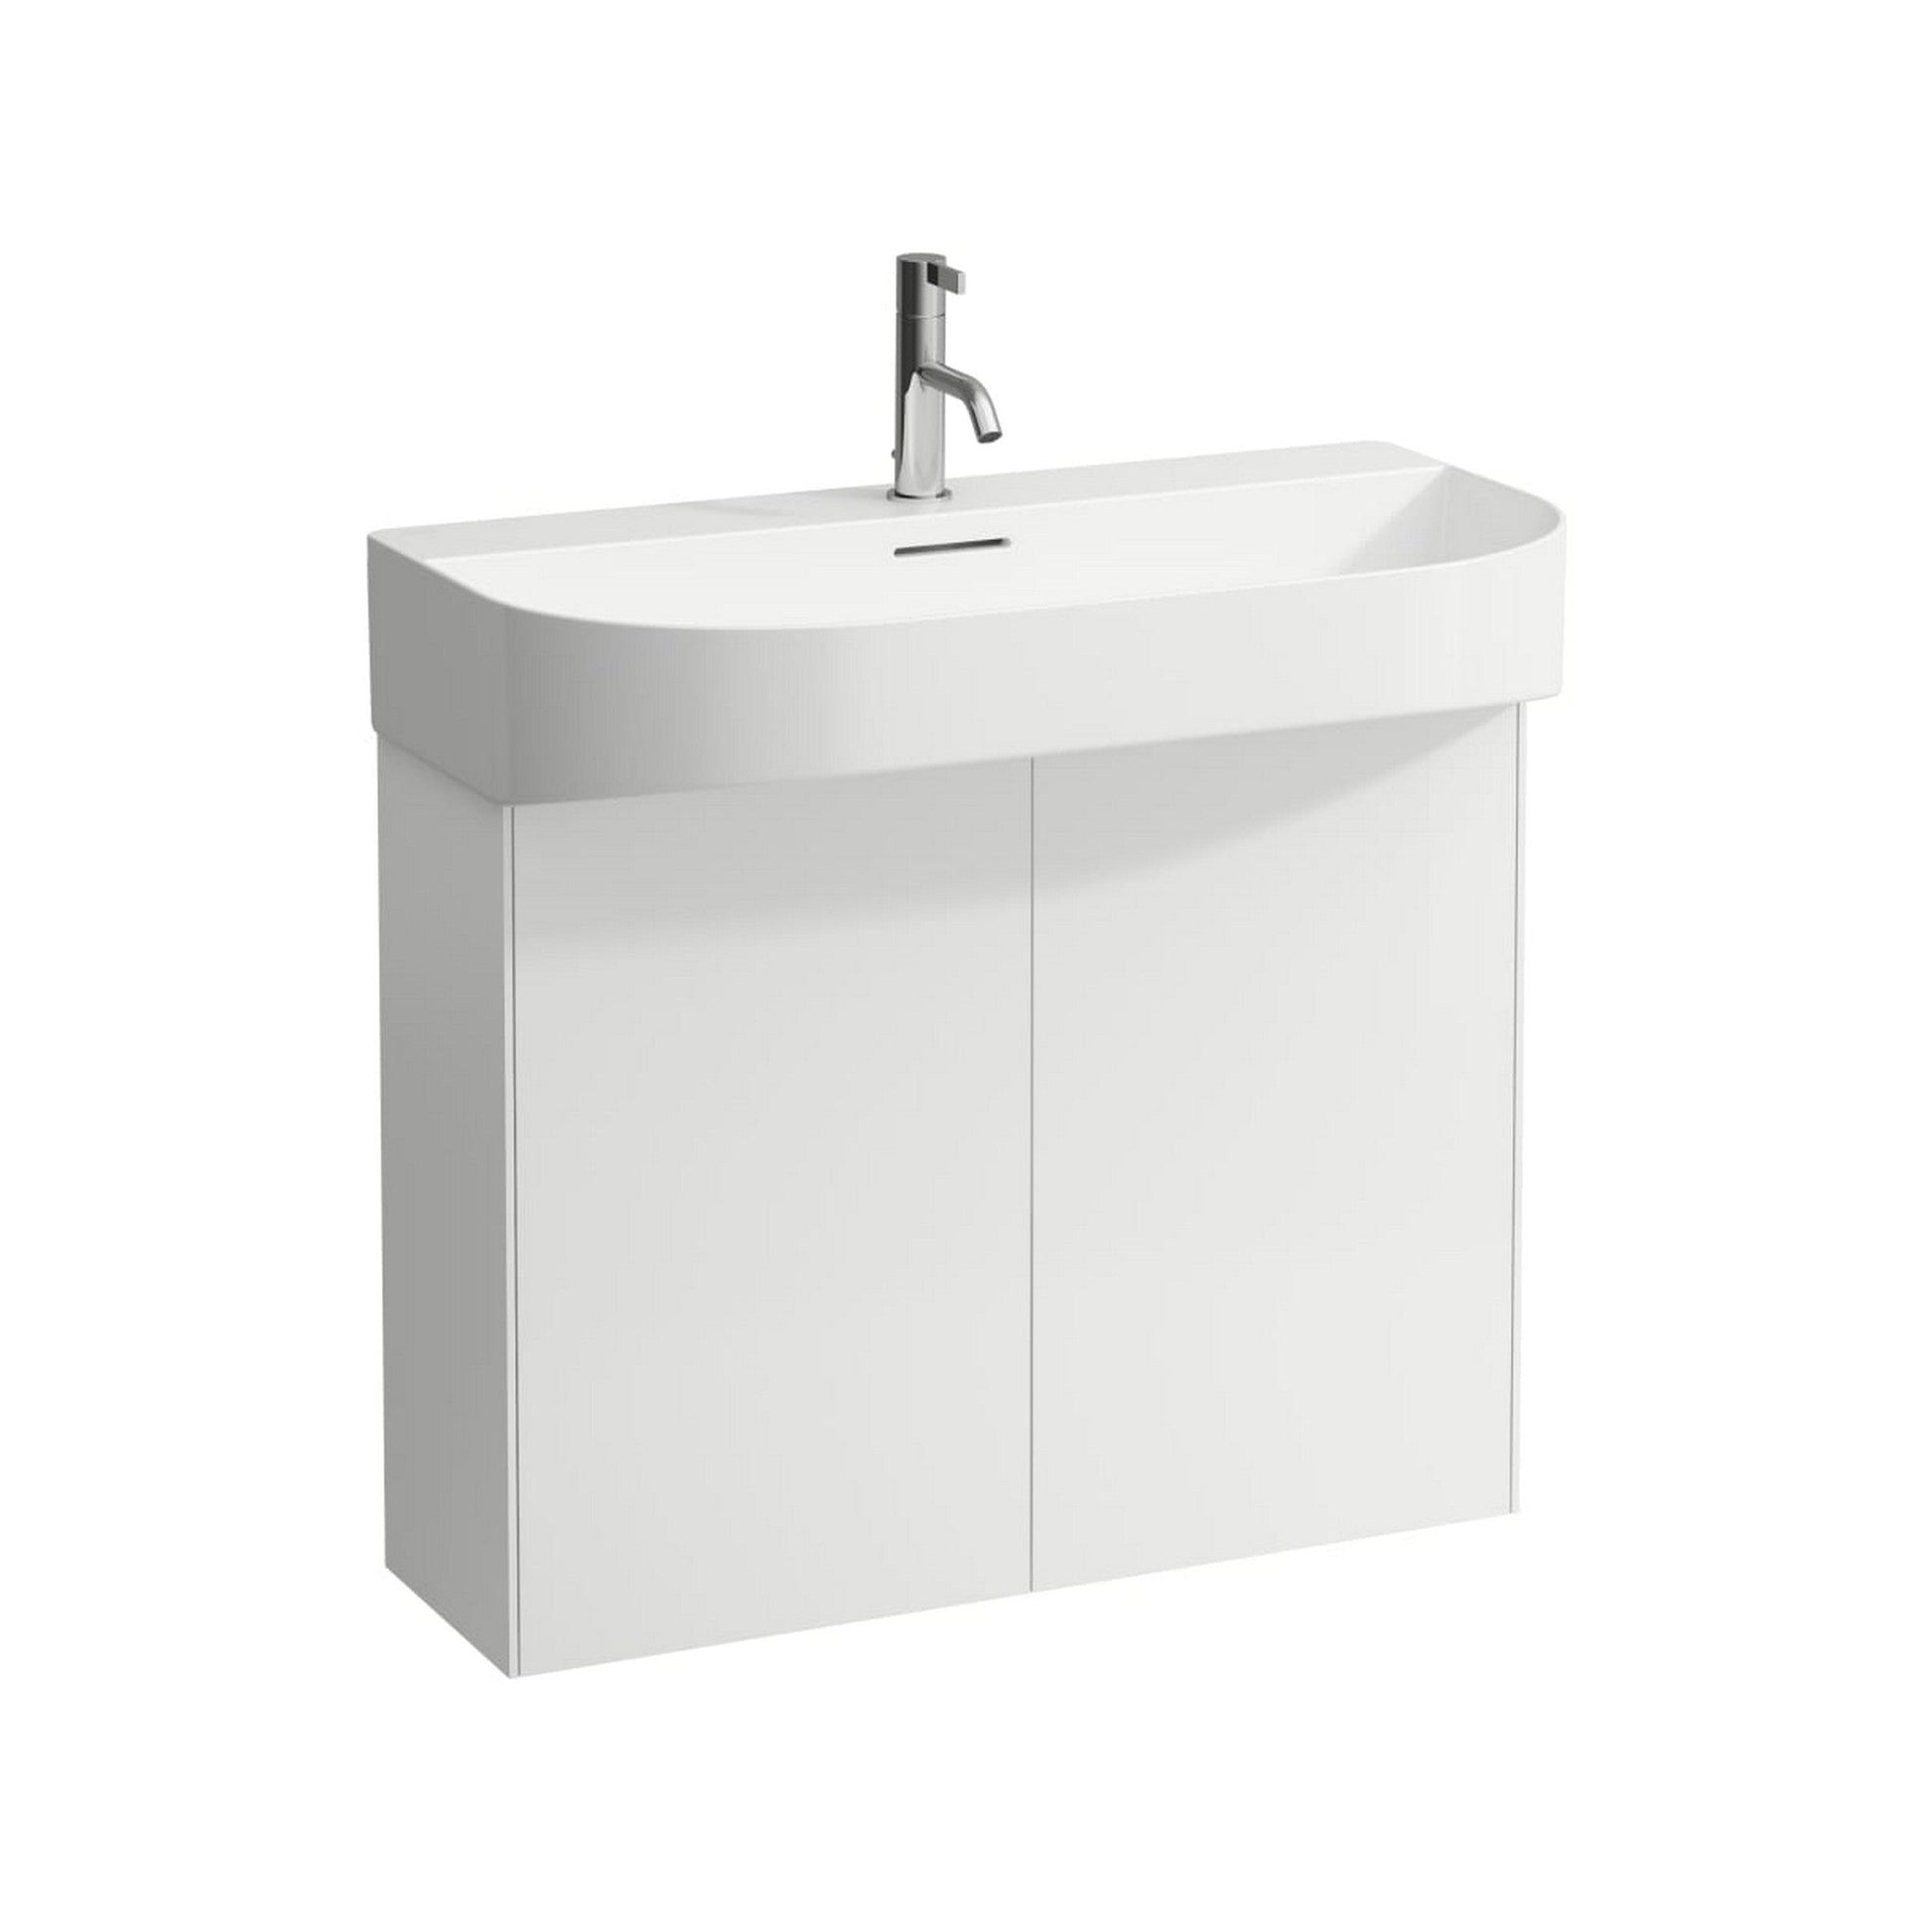 Laufen Sonar 32" Matte White Ceramic Wall-Mounted Bathroom Sink With 3 Faucet Holes